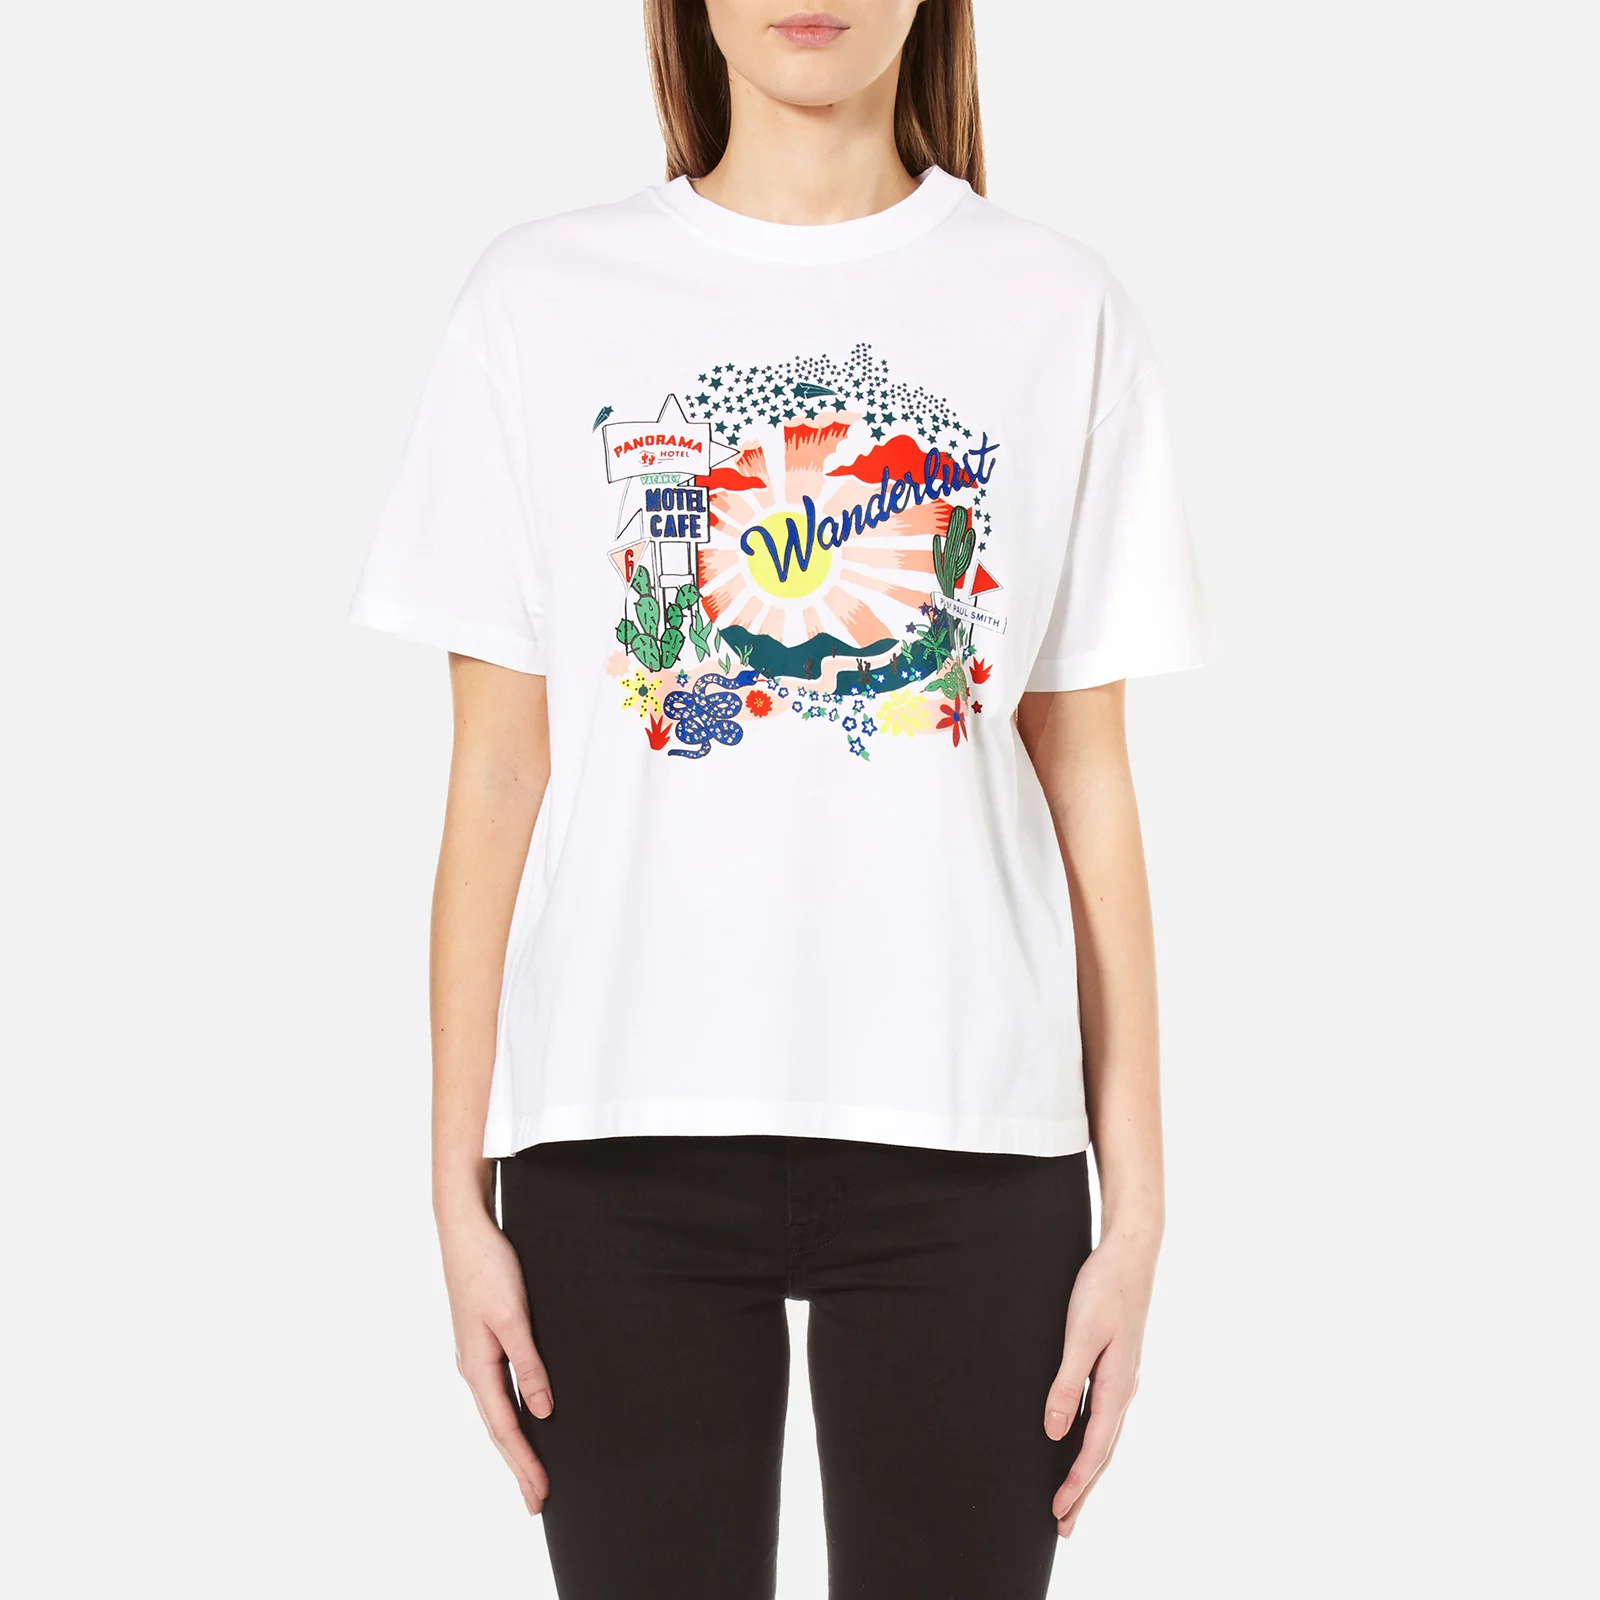 PS by Paul Smith Women's Wanderlust T-Shirt - White Image 1